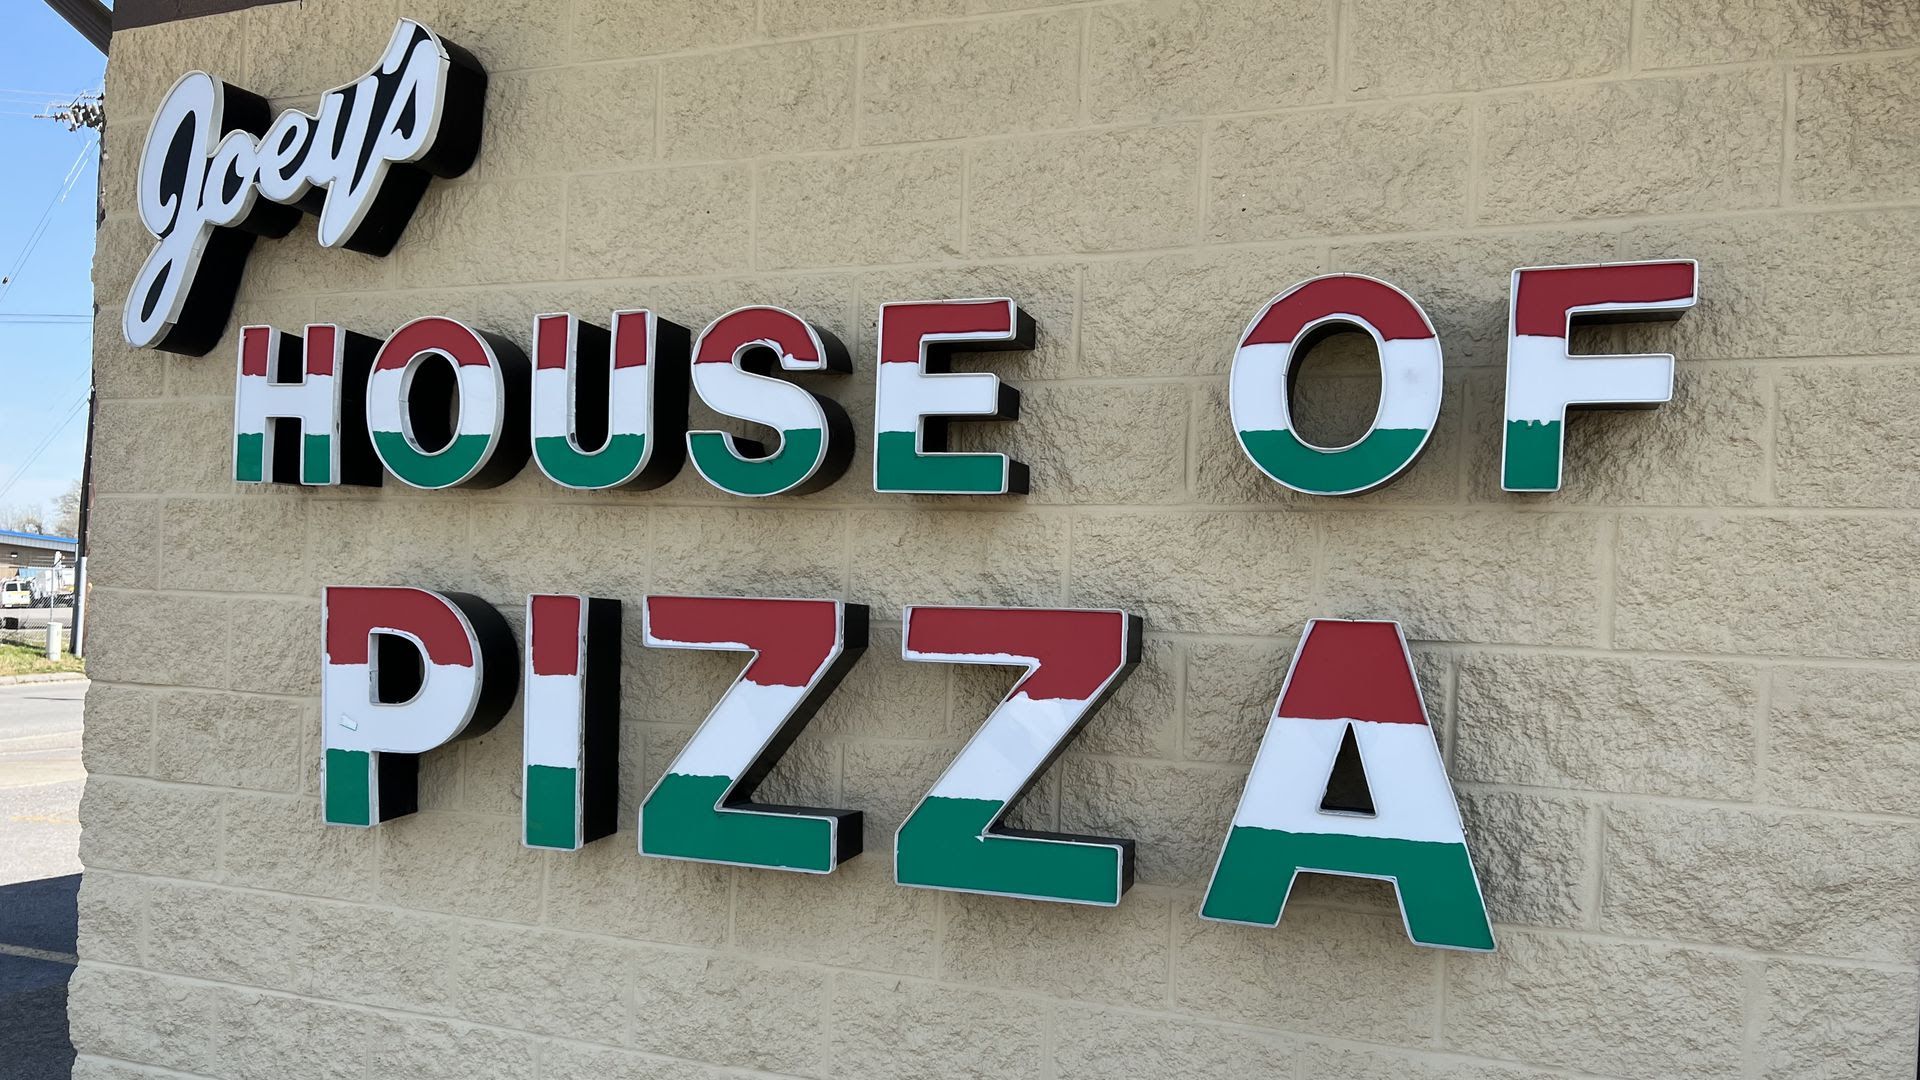 Joey's house of pizza